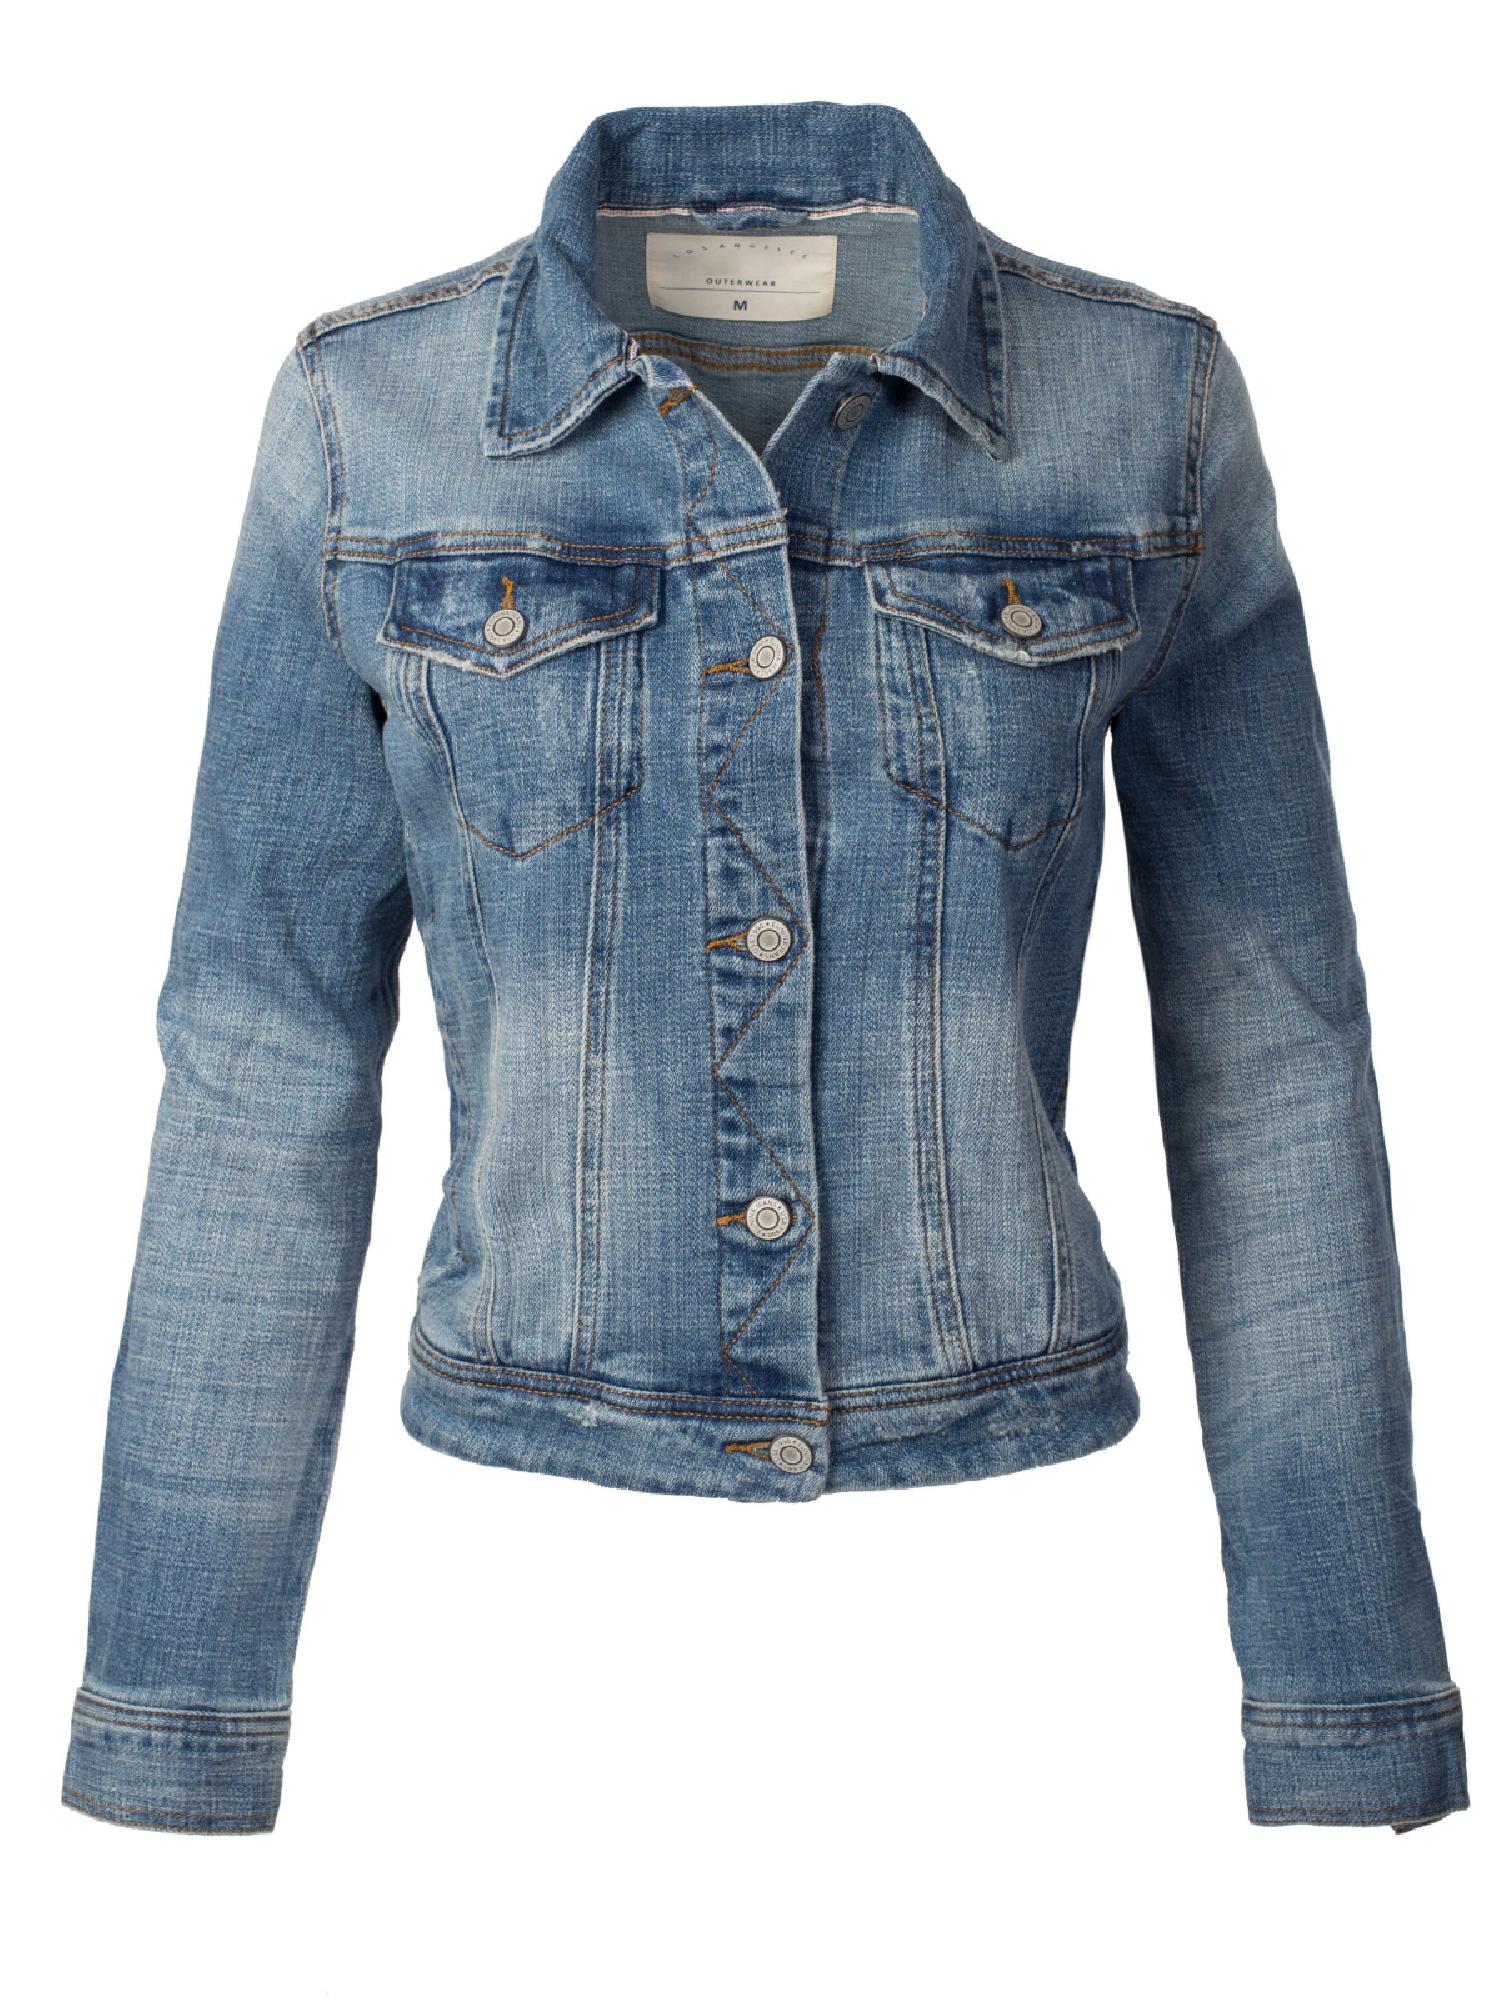 Made by Olivia Women's Classic Casual Vintage Denim Jean Jacket - image 1 of 5